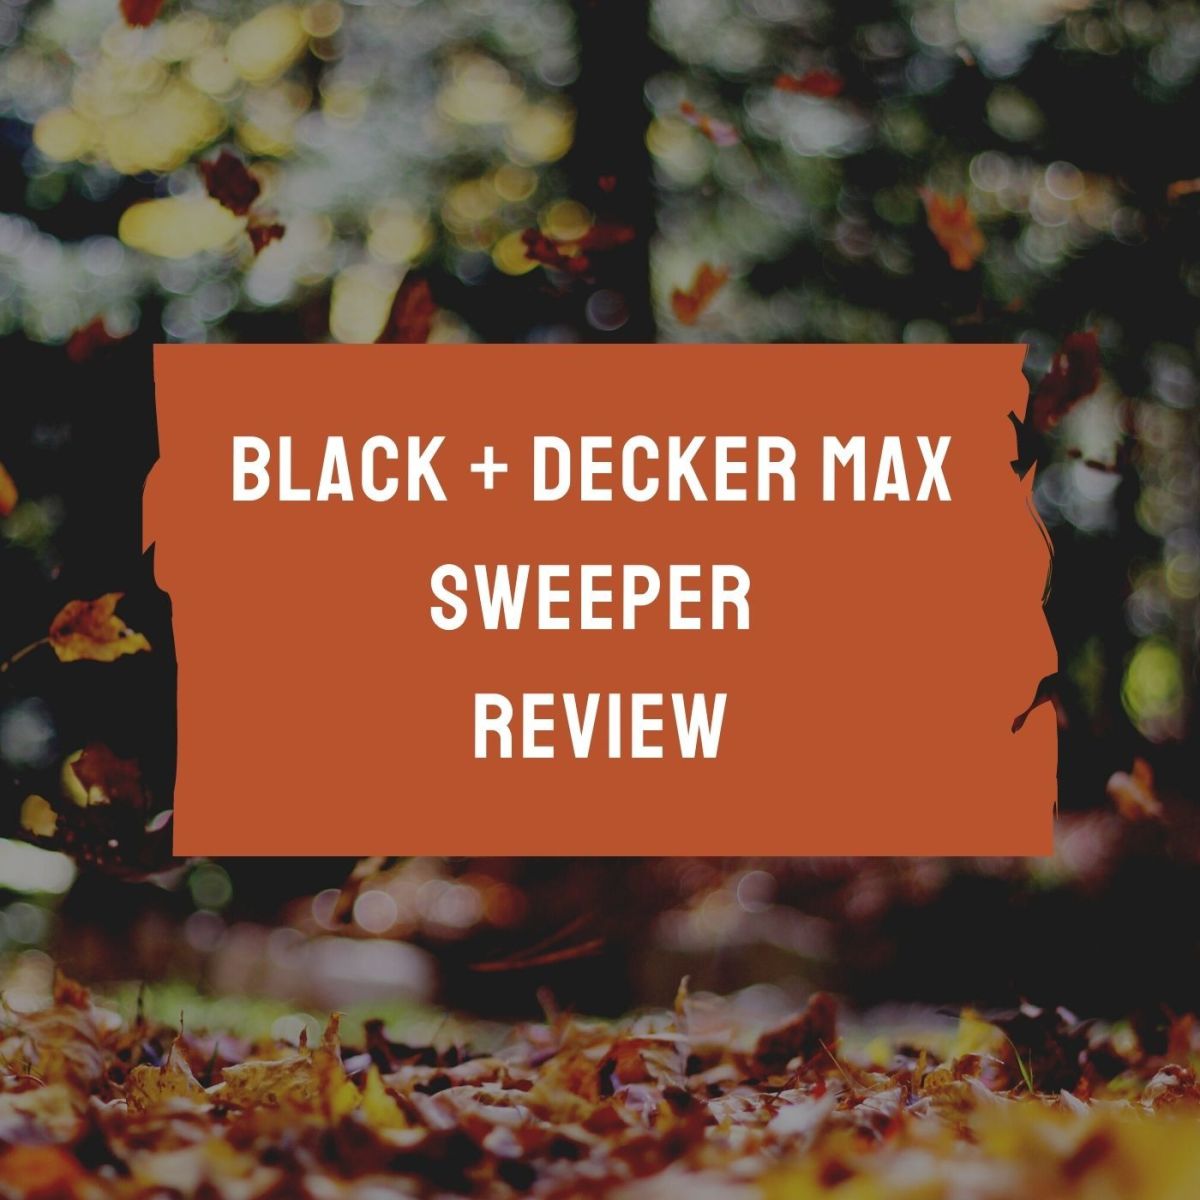 Black + Decker Max Sweeper Review